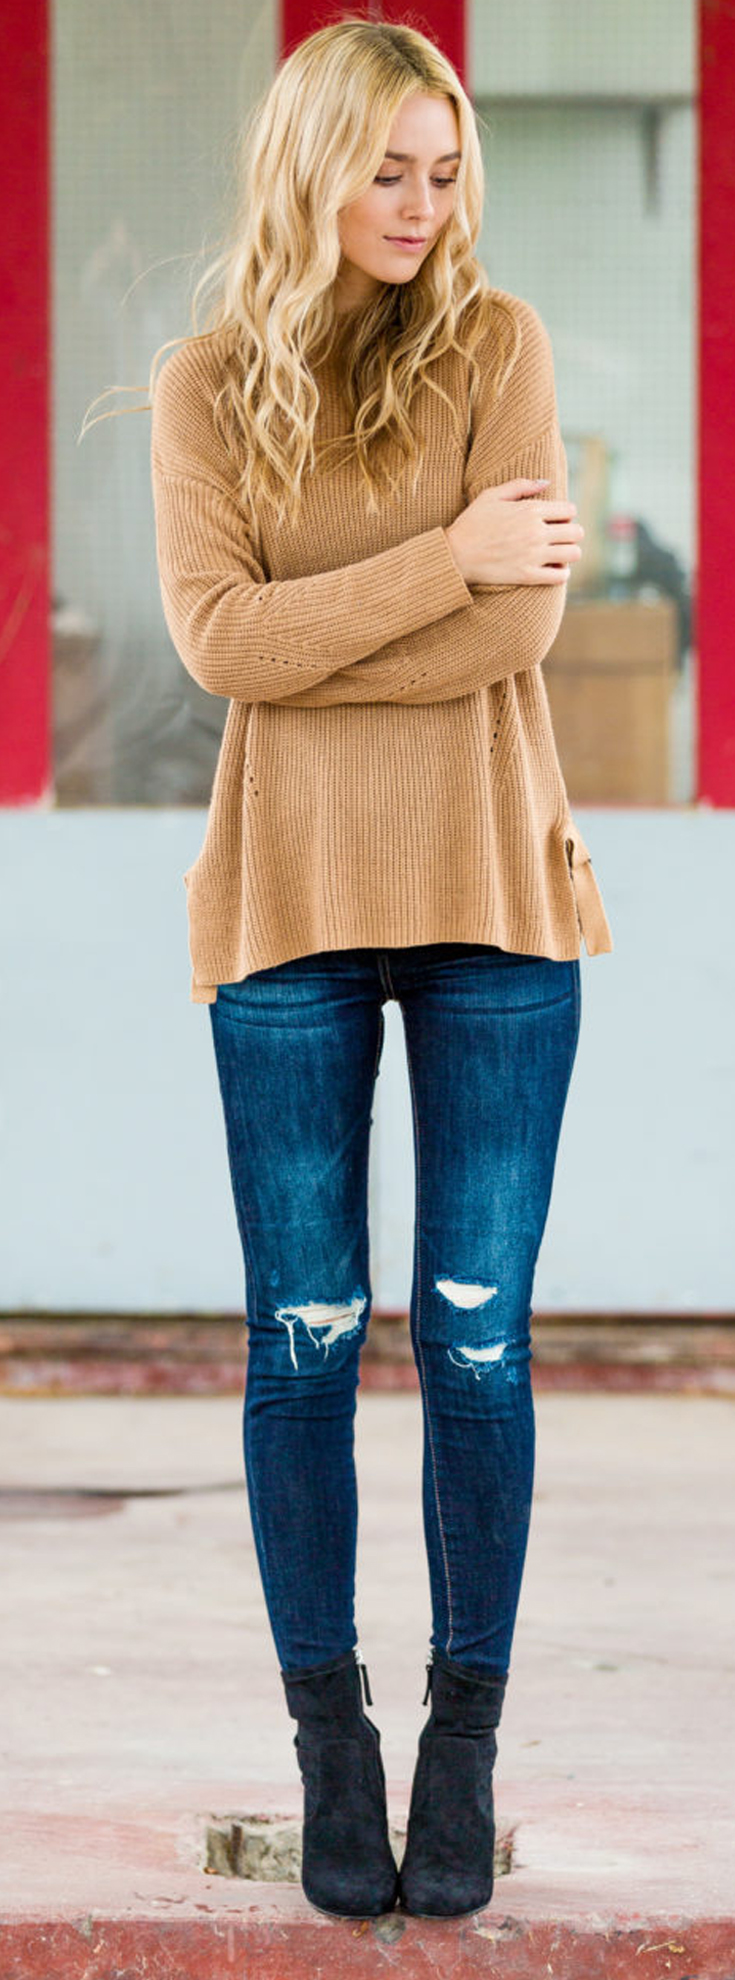 Camel sweater, Blue jeans and black boots - Sheridan Gregory, Blue Eyed Finch.